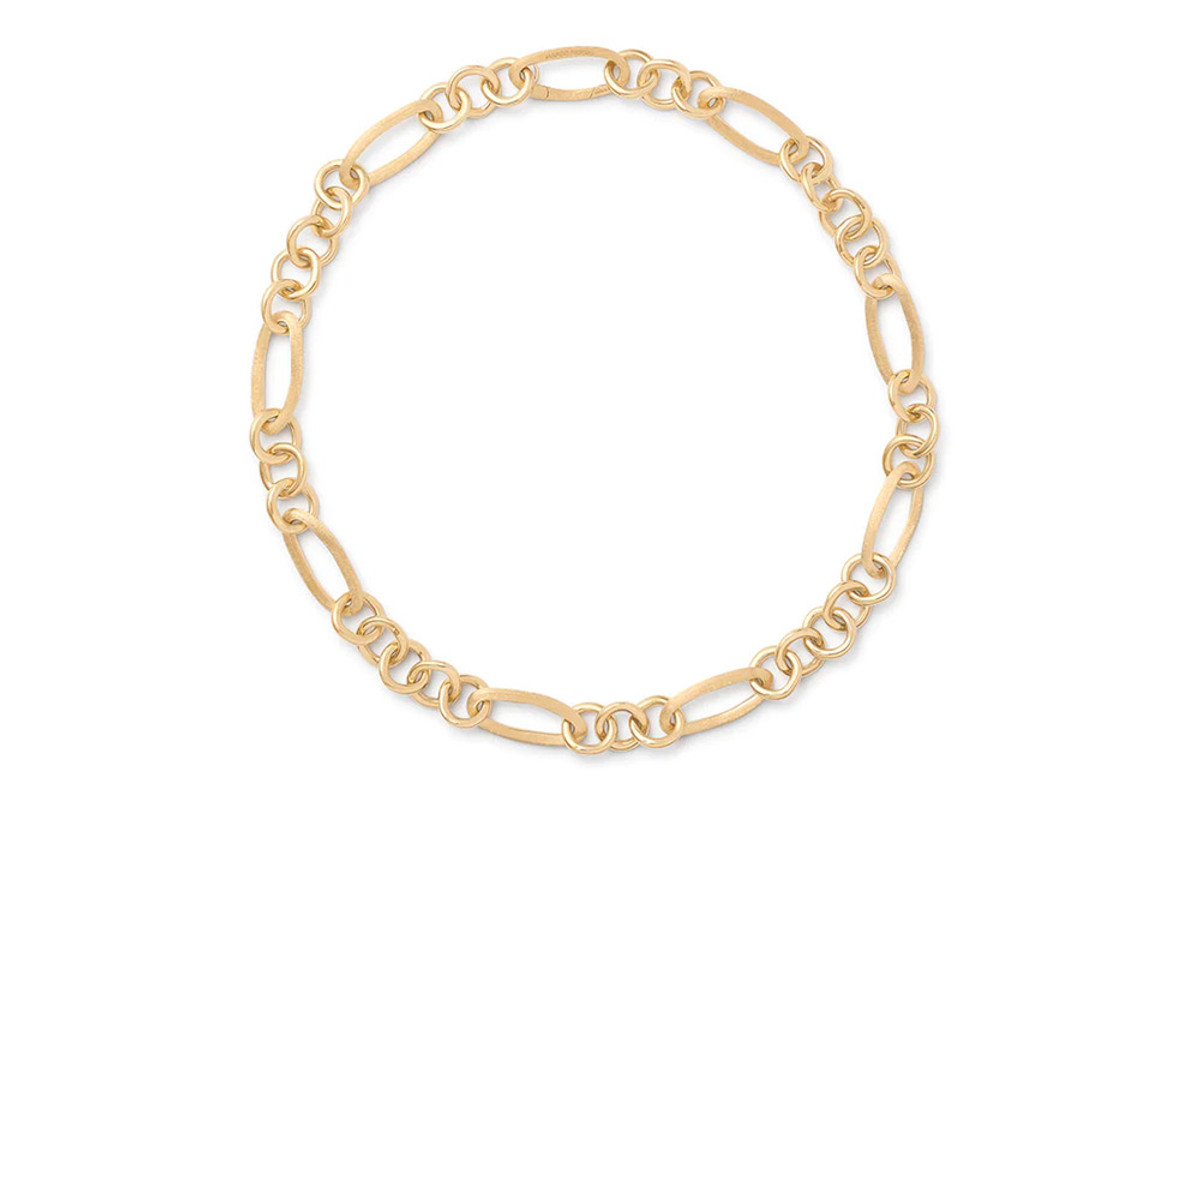 Marco Bicego Jaipur Link Collection 18K Yellow Gold Mixed Link Necklace-44441